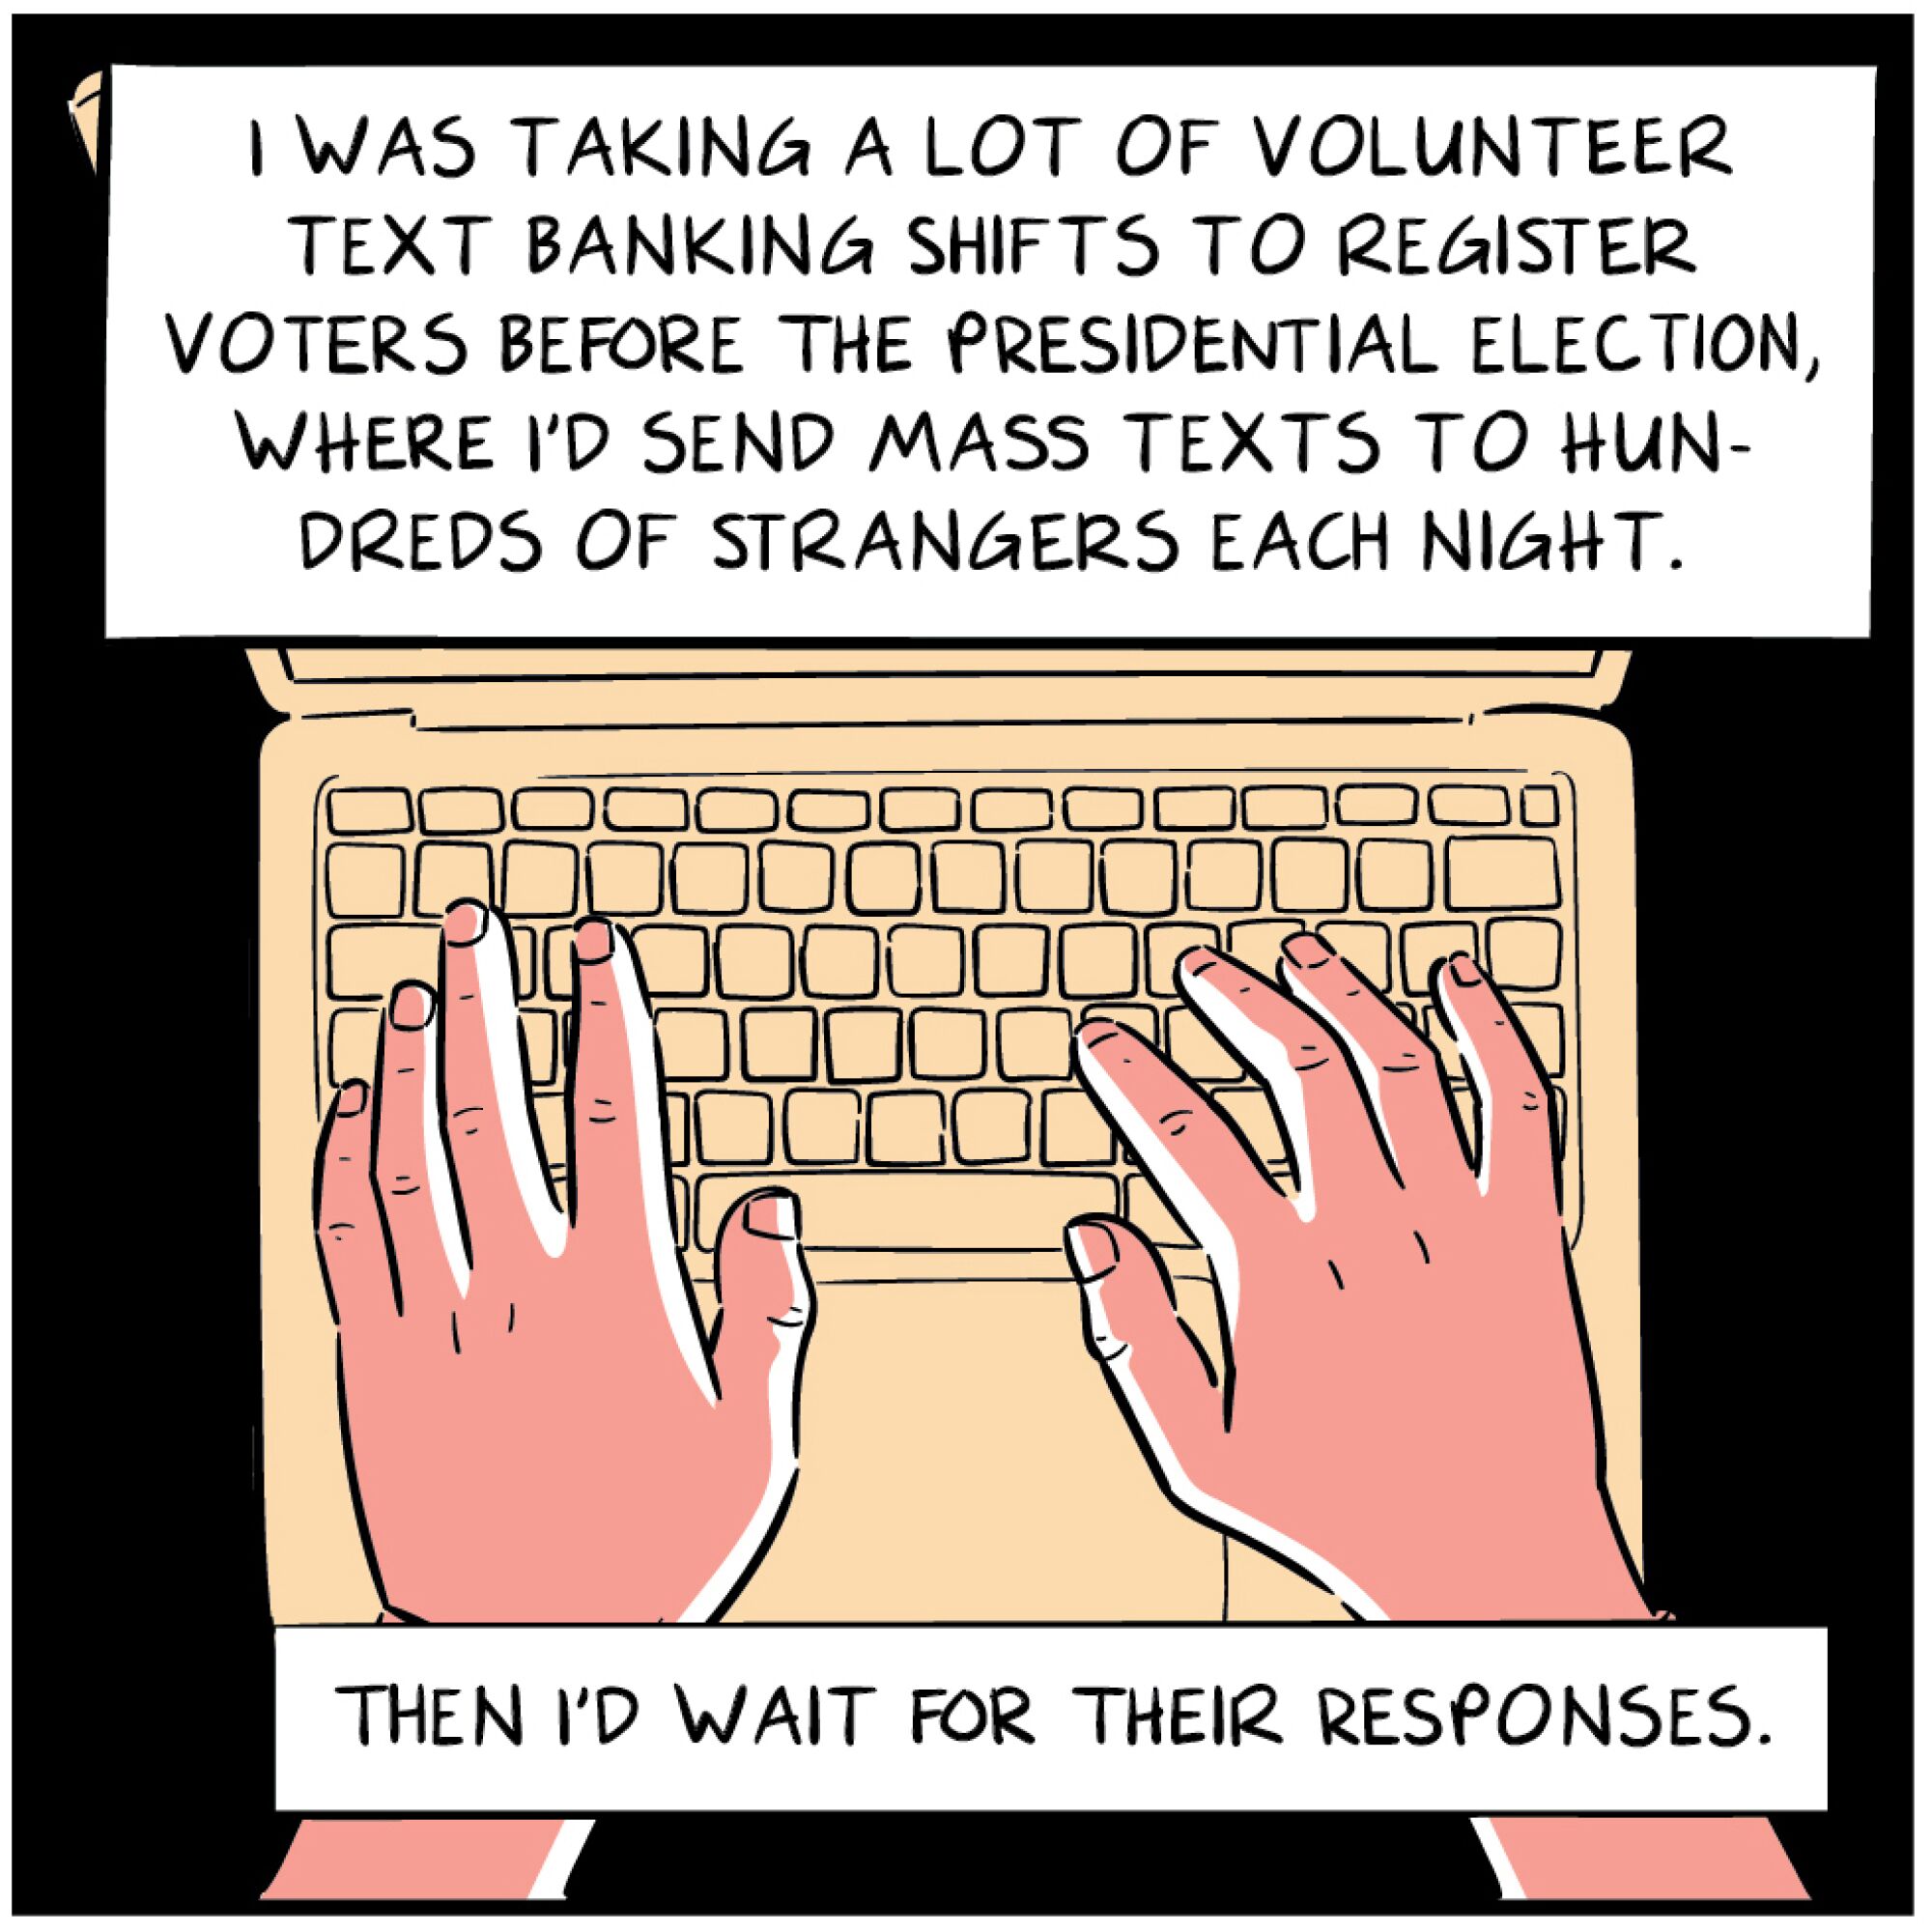 Comic panel about with an illustration of hands typing on a keyboard.